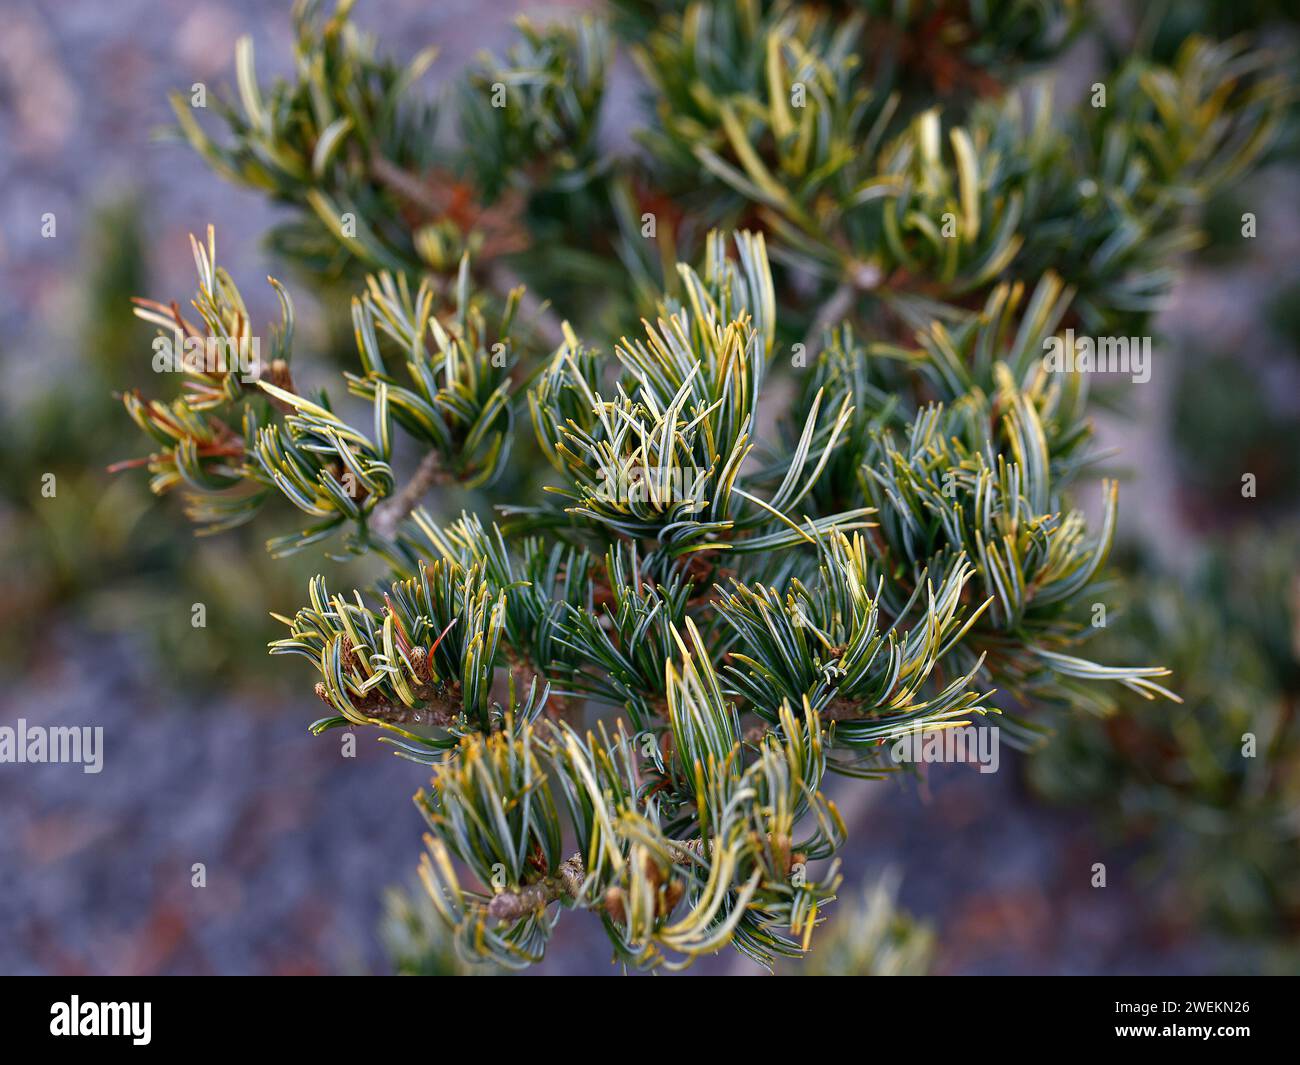 Closeup of the green pine leaves with golden banding of the evergreen  garden tree Pinus parviflora fukai. Stock Photo